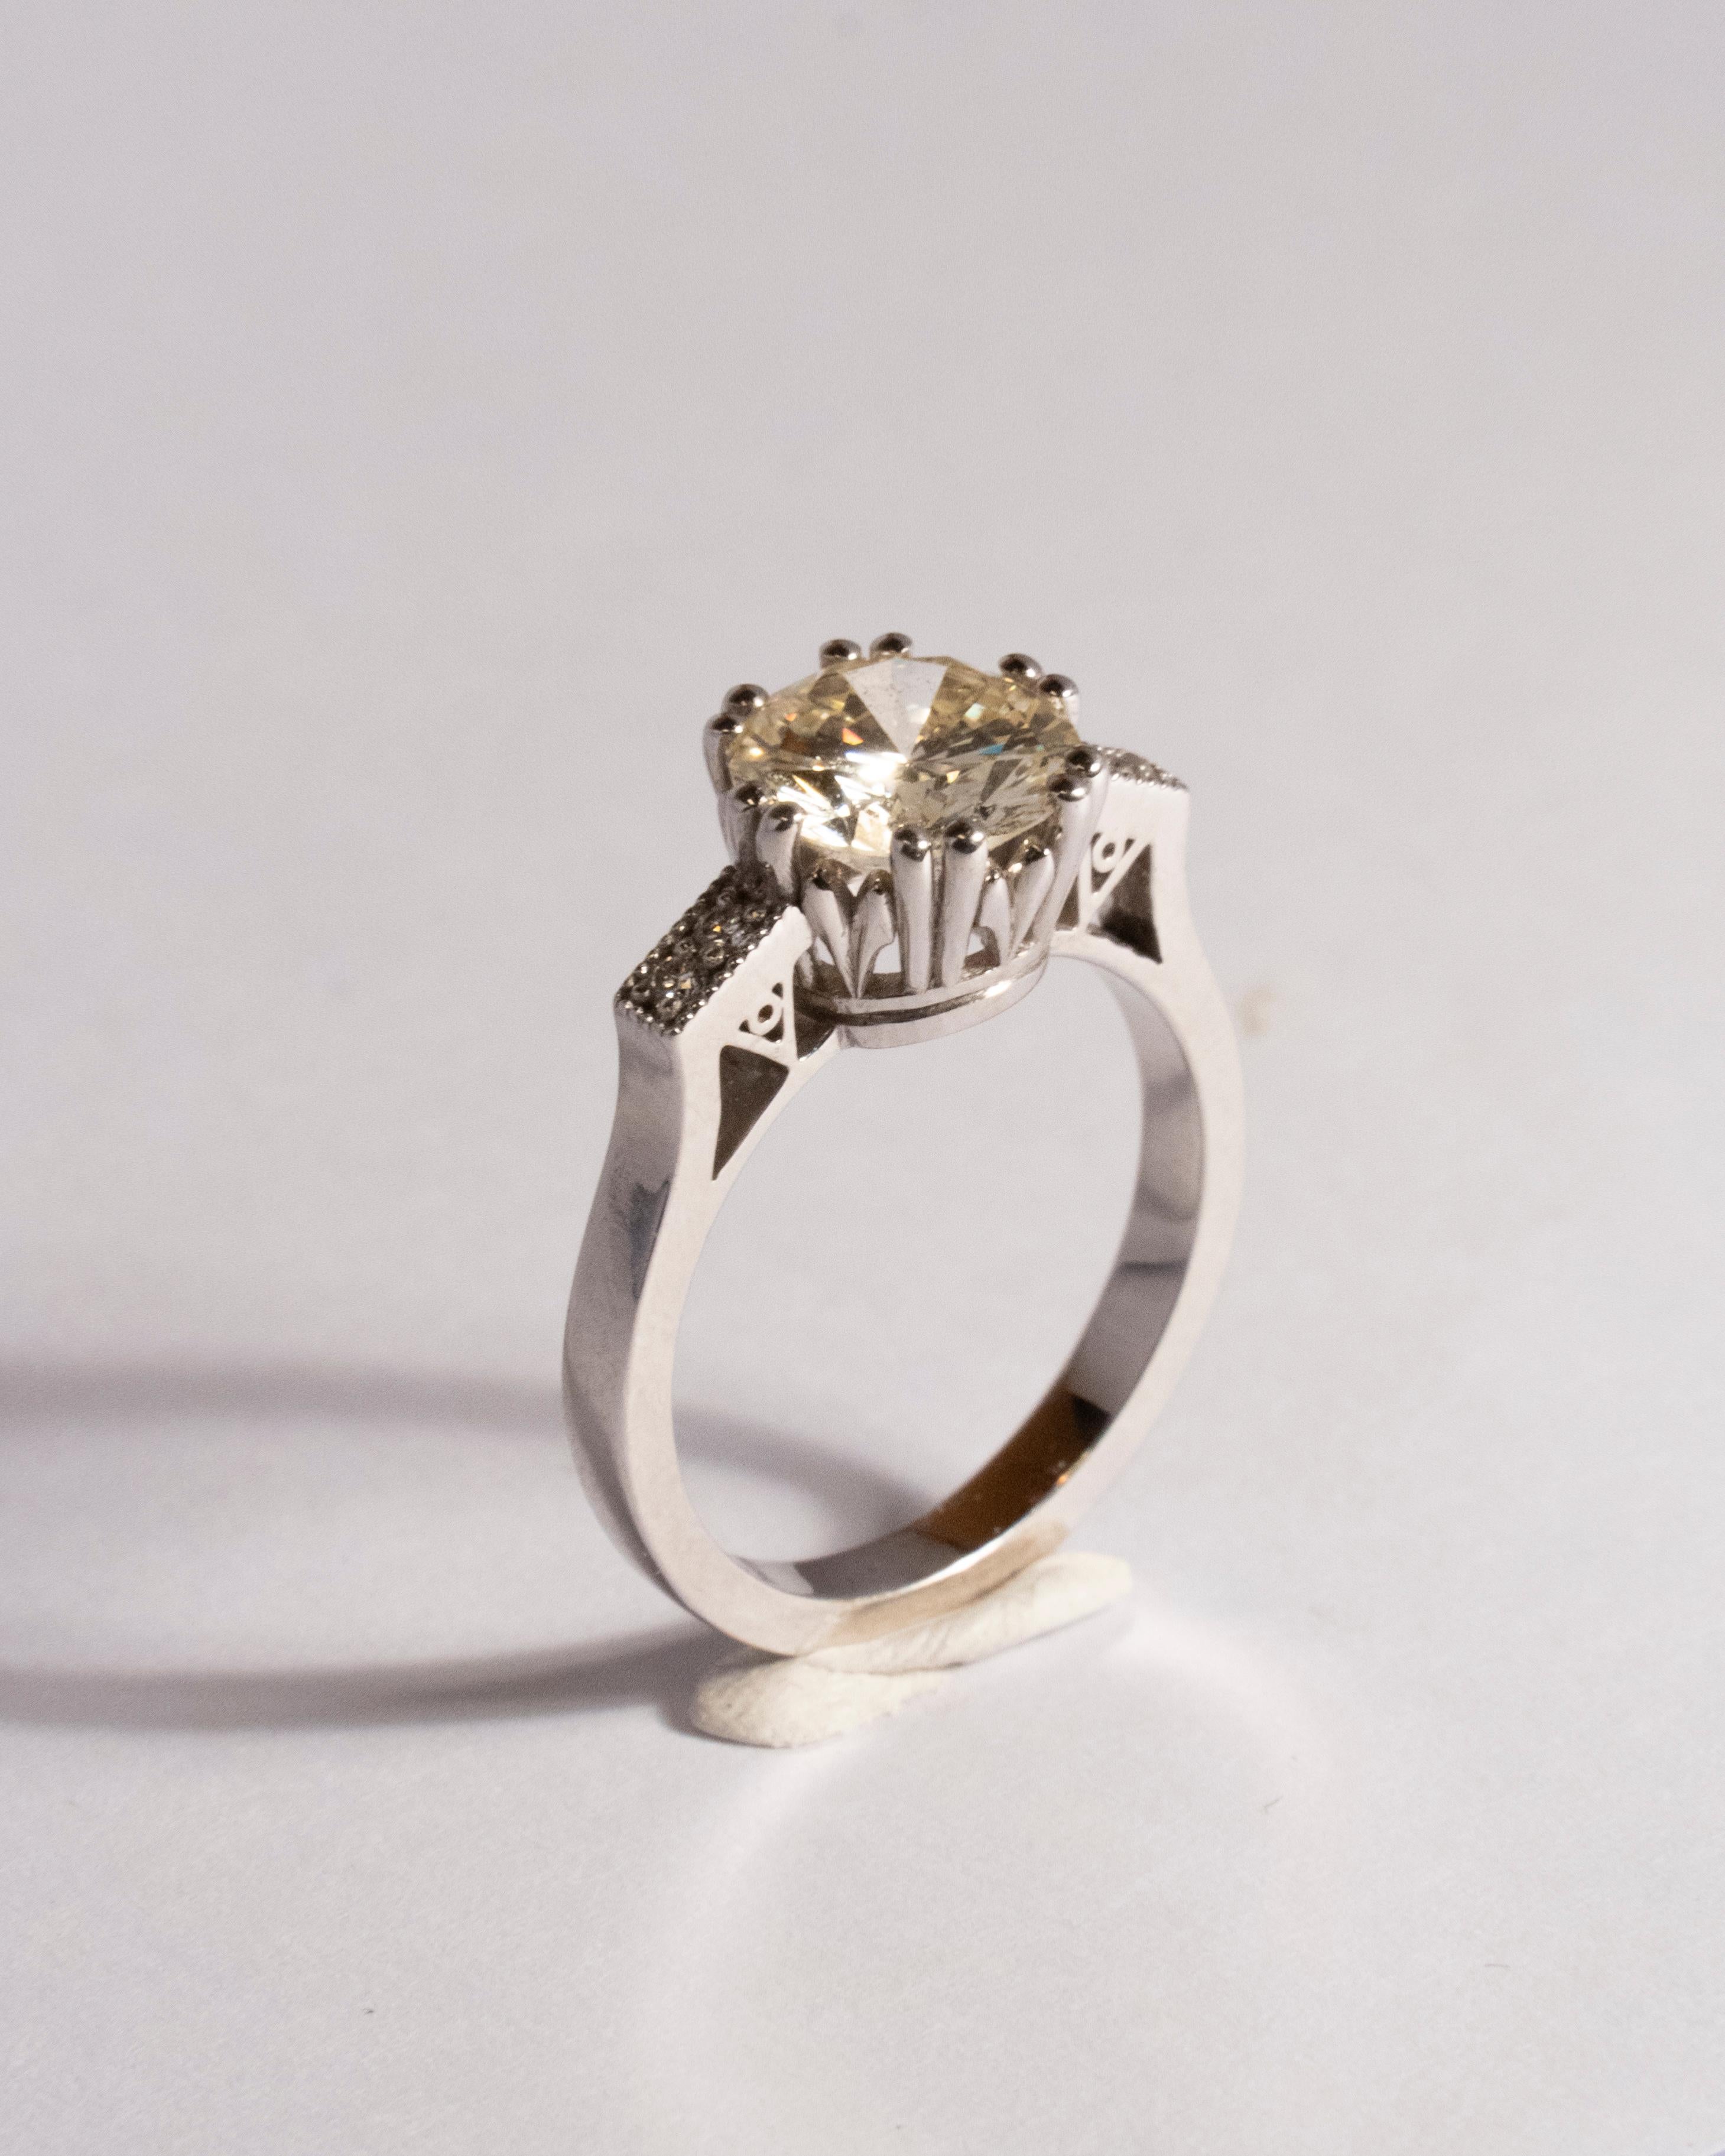 Brilliant Cut Art-Deco styled diamond ring ‘Vittoria’ with a 2ct Antique light yellow Diamond For Sale